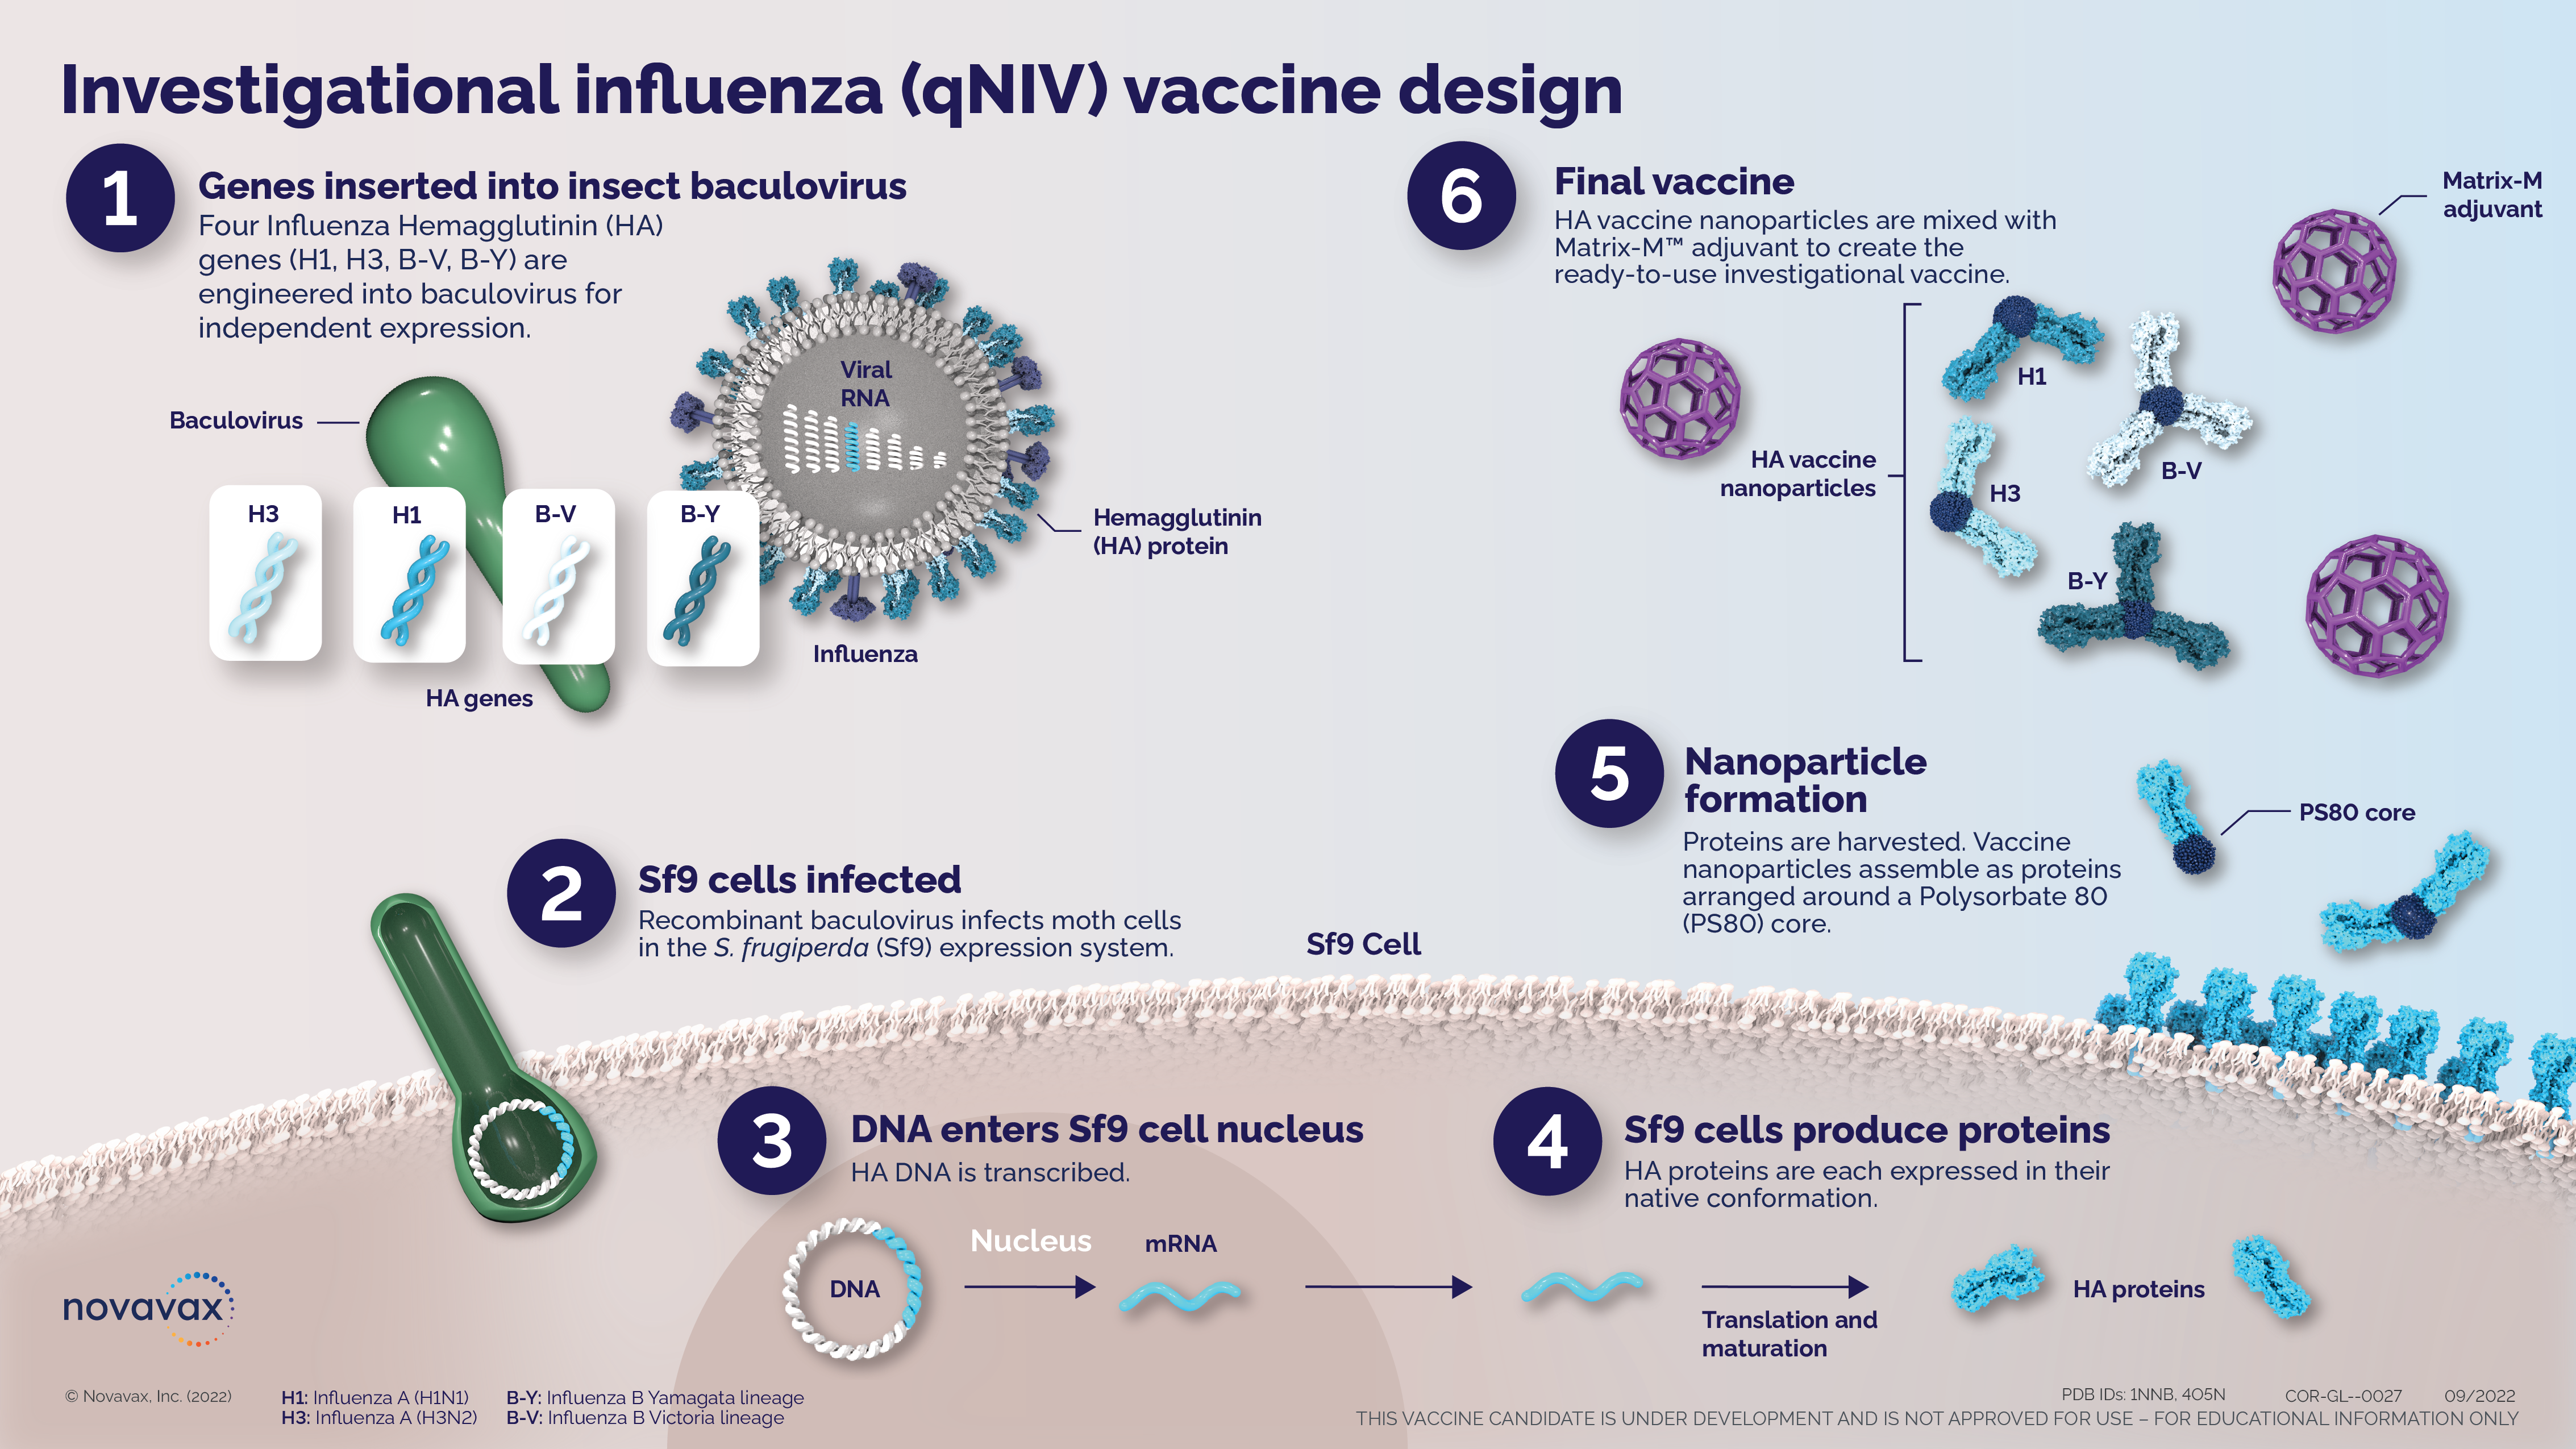 Infographic displaying of the Investigational influenza (qNIV) vaccine design.